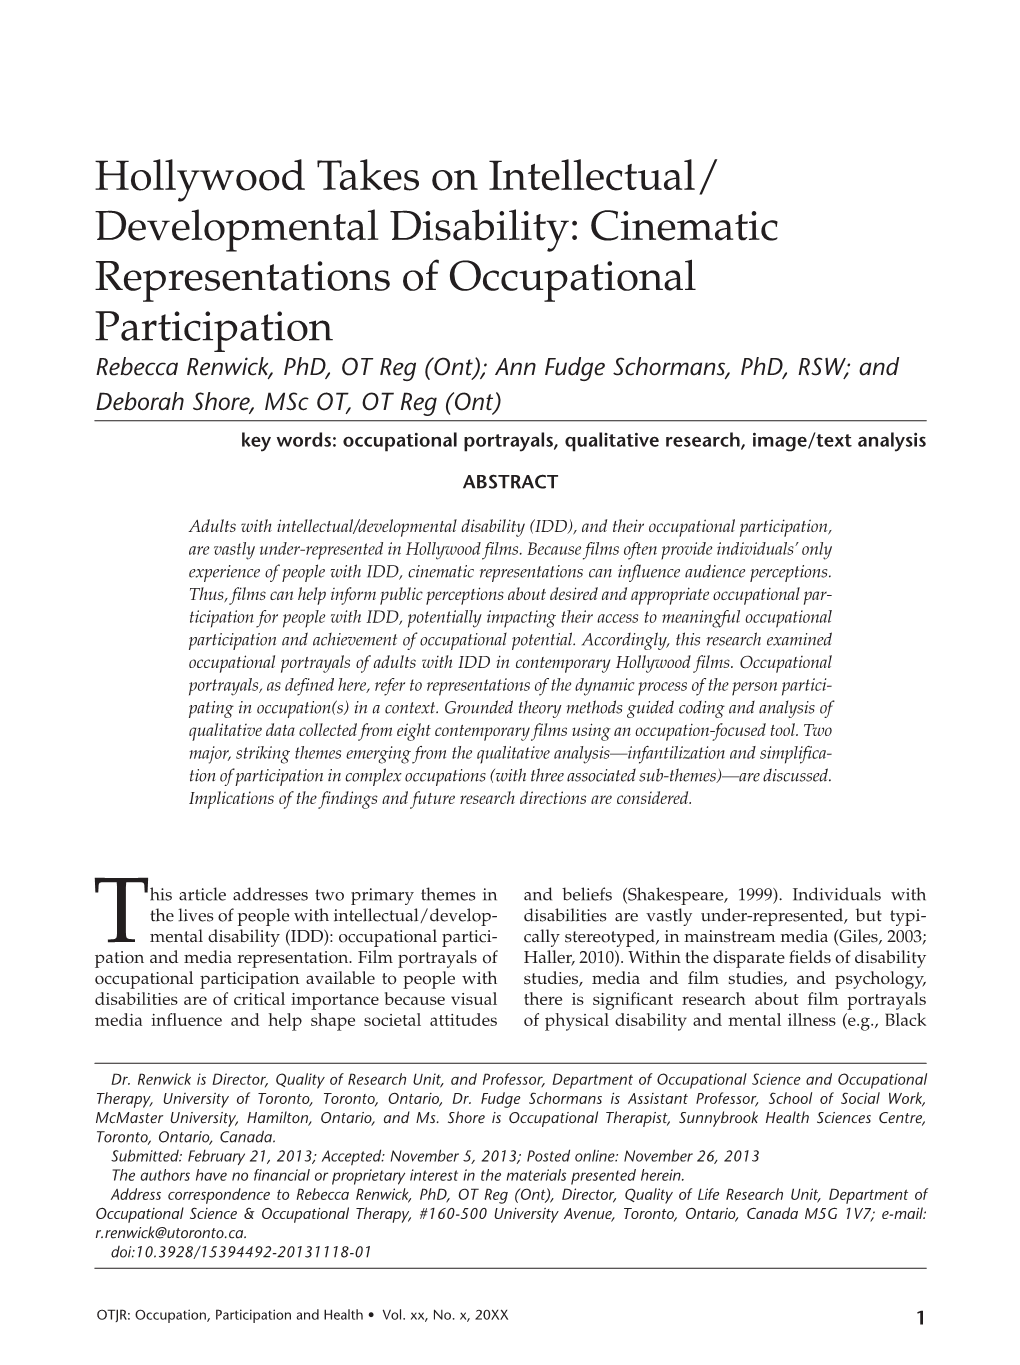 Hollywood Takes on Intellectual/ Developmental Disability